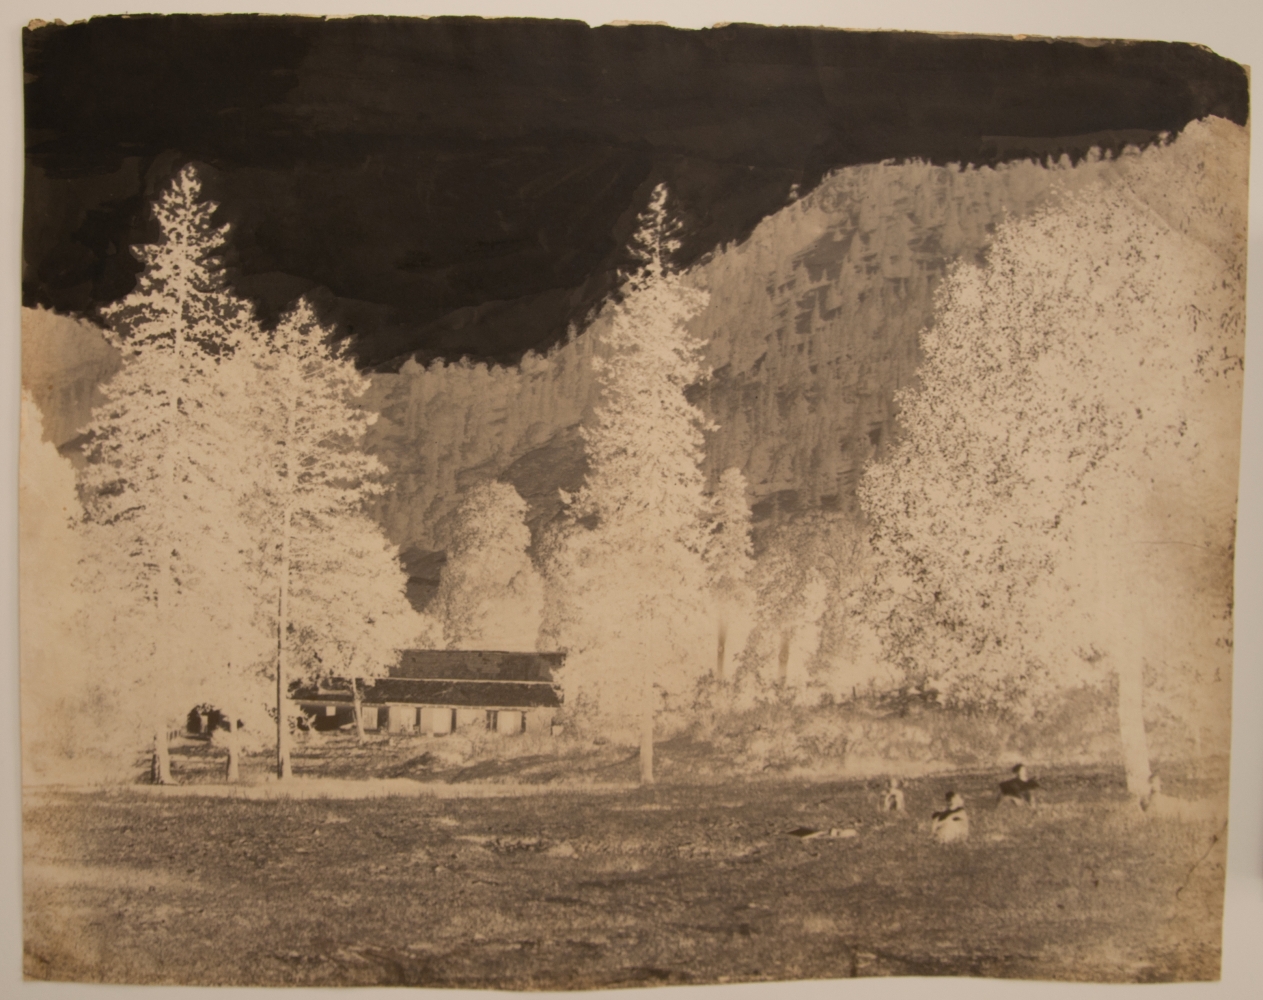 Dr. John MURRAY (Scottish, 1809-1898) Nainital, view of house in forest, circa 1858-1862 Calotype negative, waxed 36.8 x 47.1 cm, irregularly trimmed